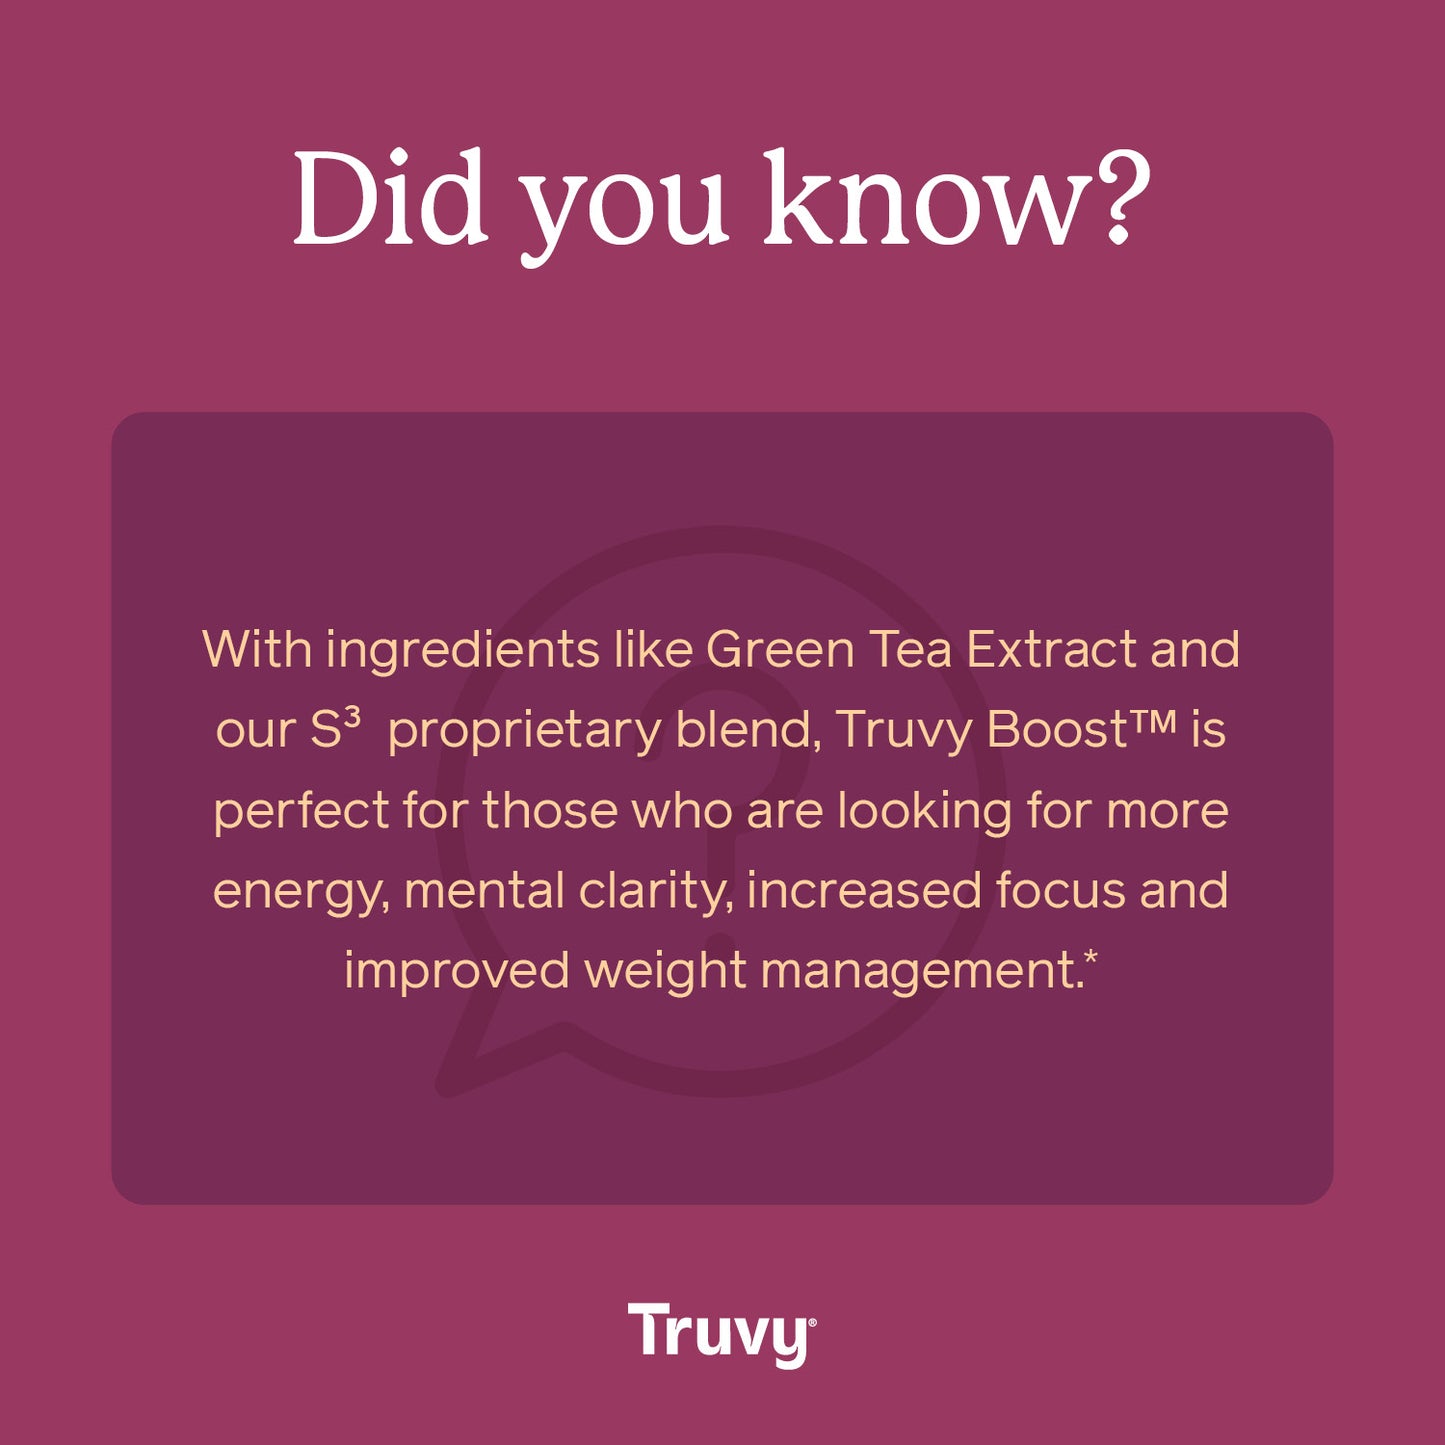 Truvy Boost Drink Variety Pack